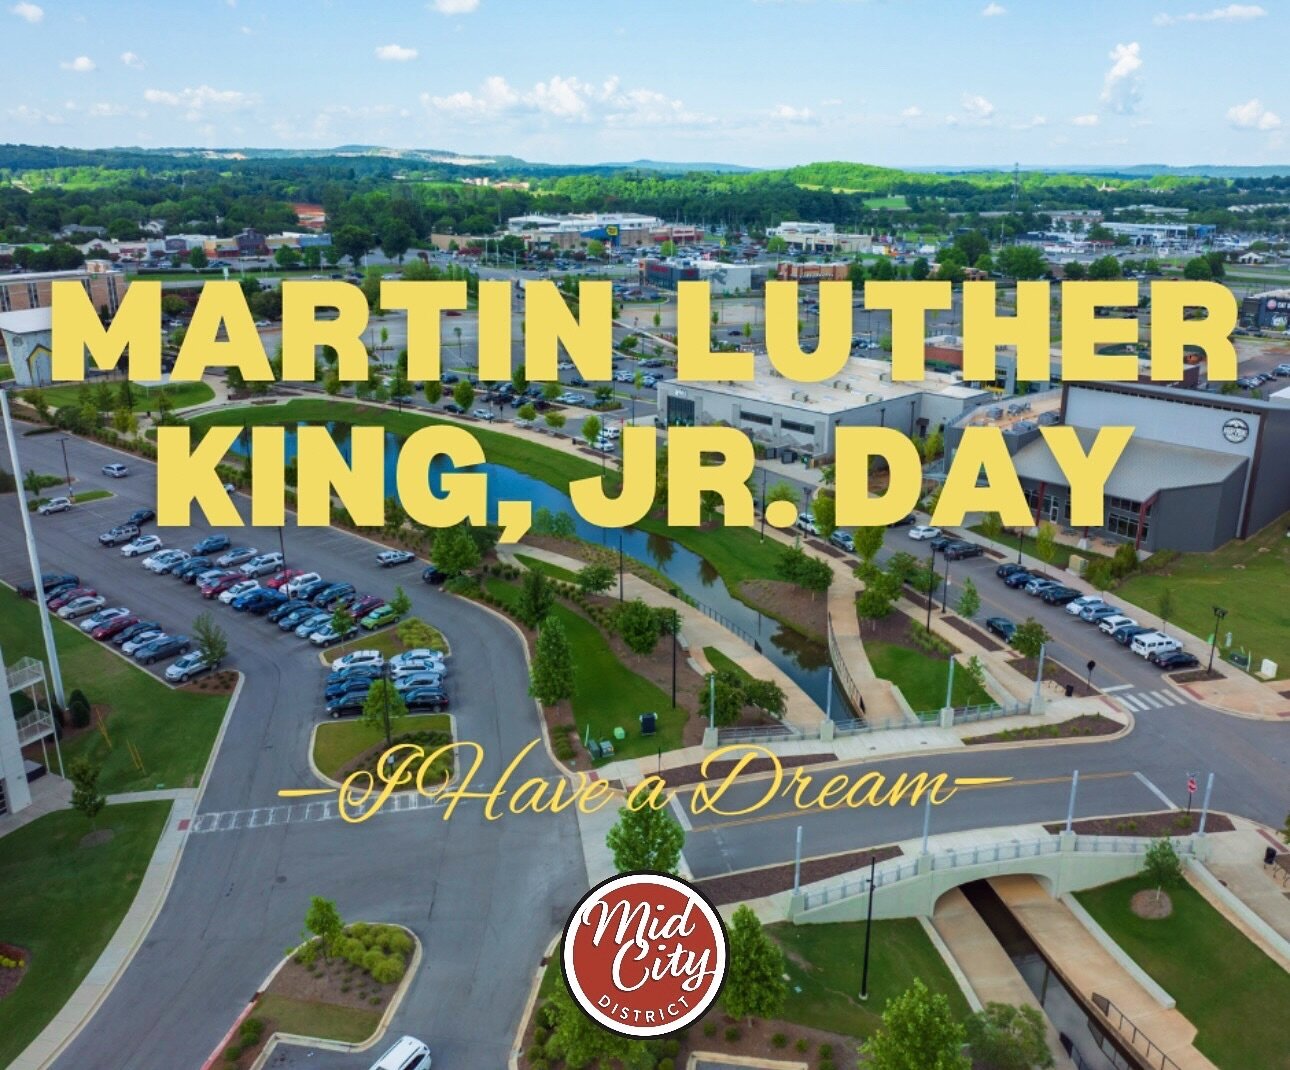 Happy MLK Jr. Day from MidCity District! 🇺🇸 

Please check with all our businesses before heading out, as many are closed for the holiday and snow today!